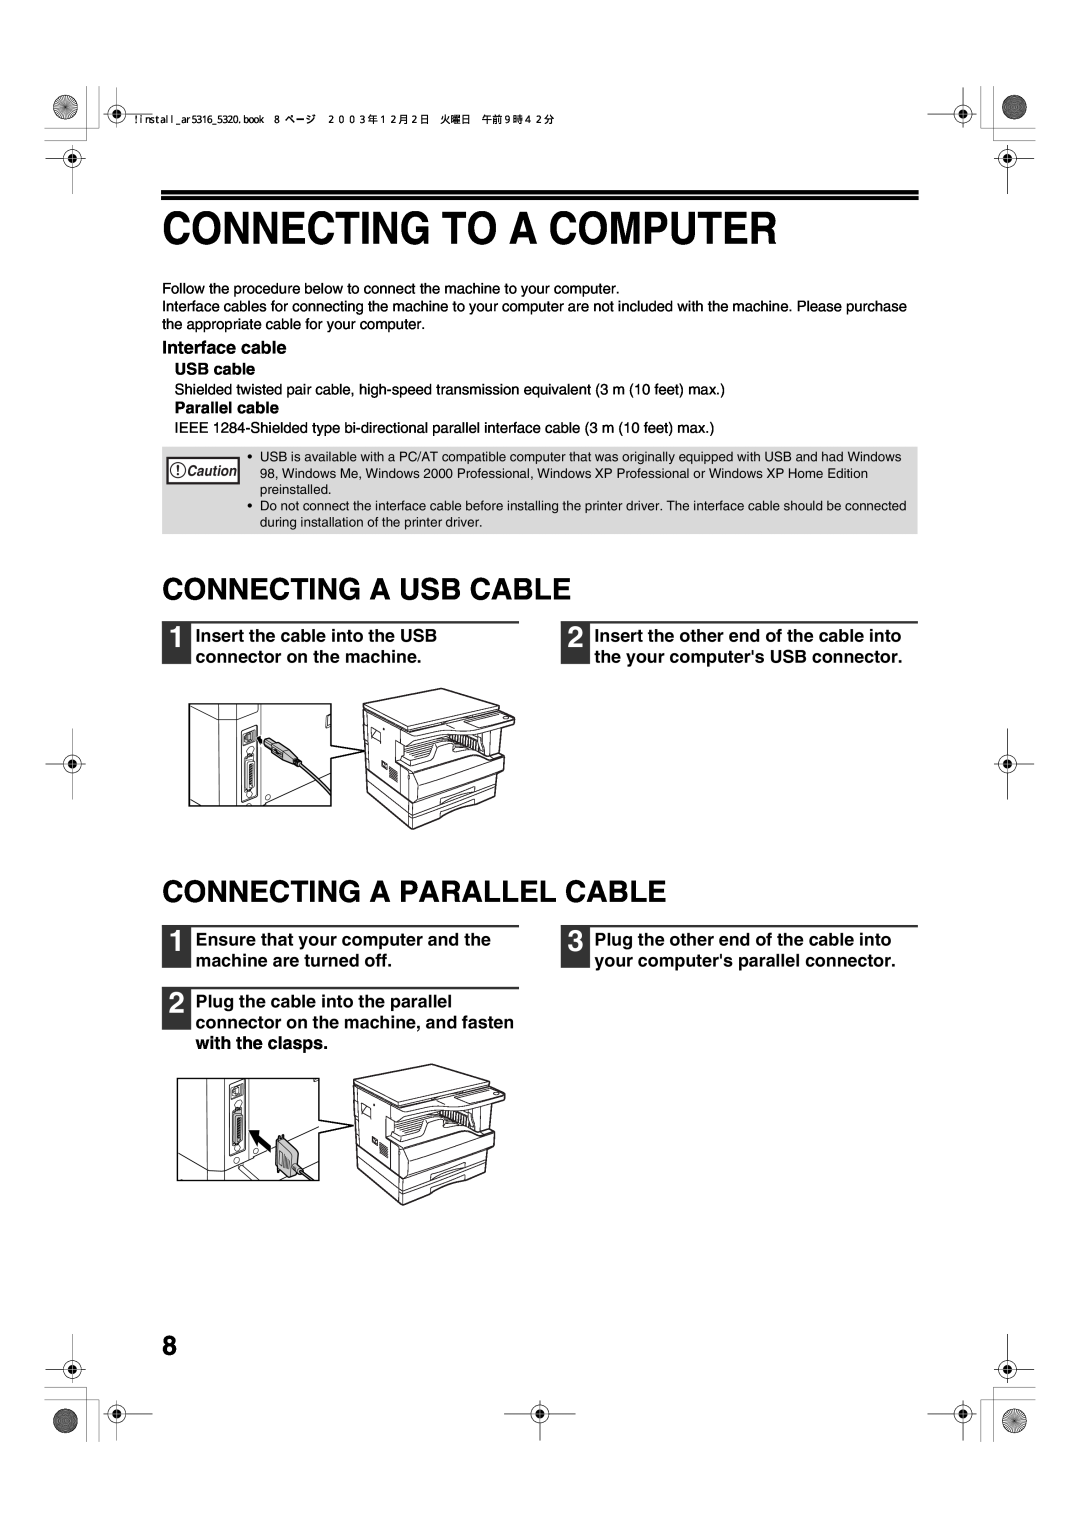 Sharp AR-5316 X, AR-5320 X setup guide Connecting To A Computer, Connecting A Usb Cable, Connecting A Parallel Cable 